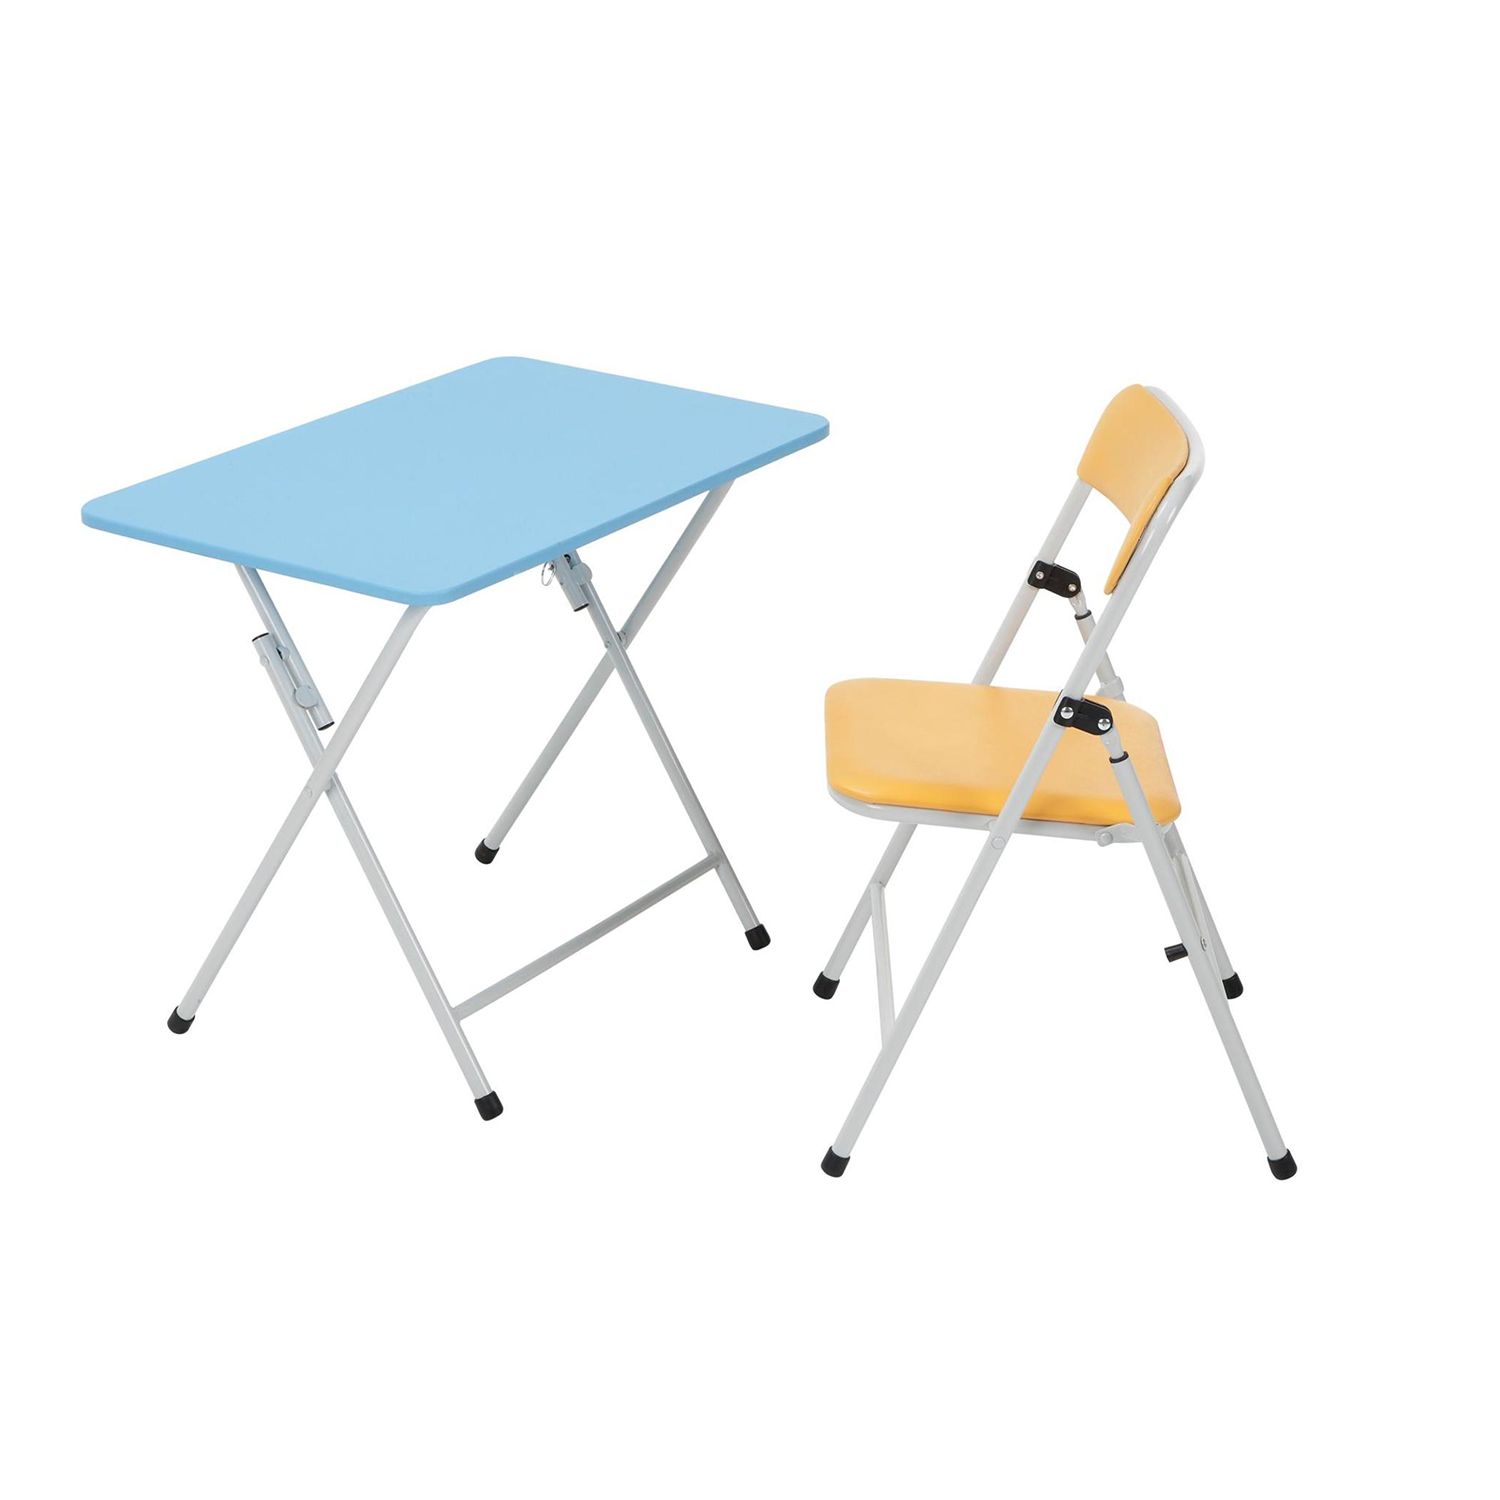 cosco children's folding table and chairs